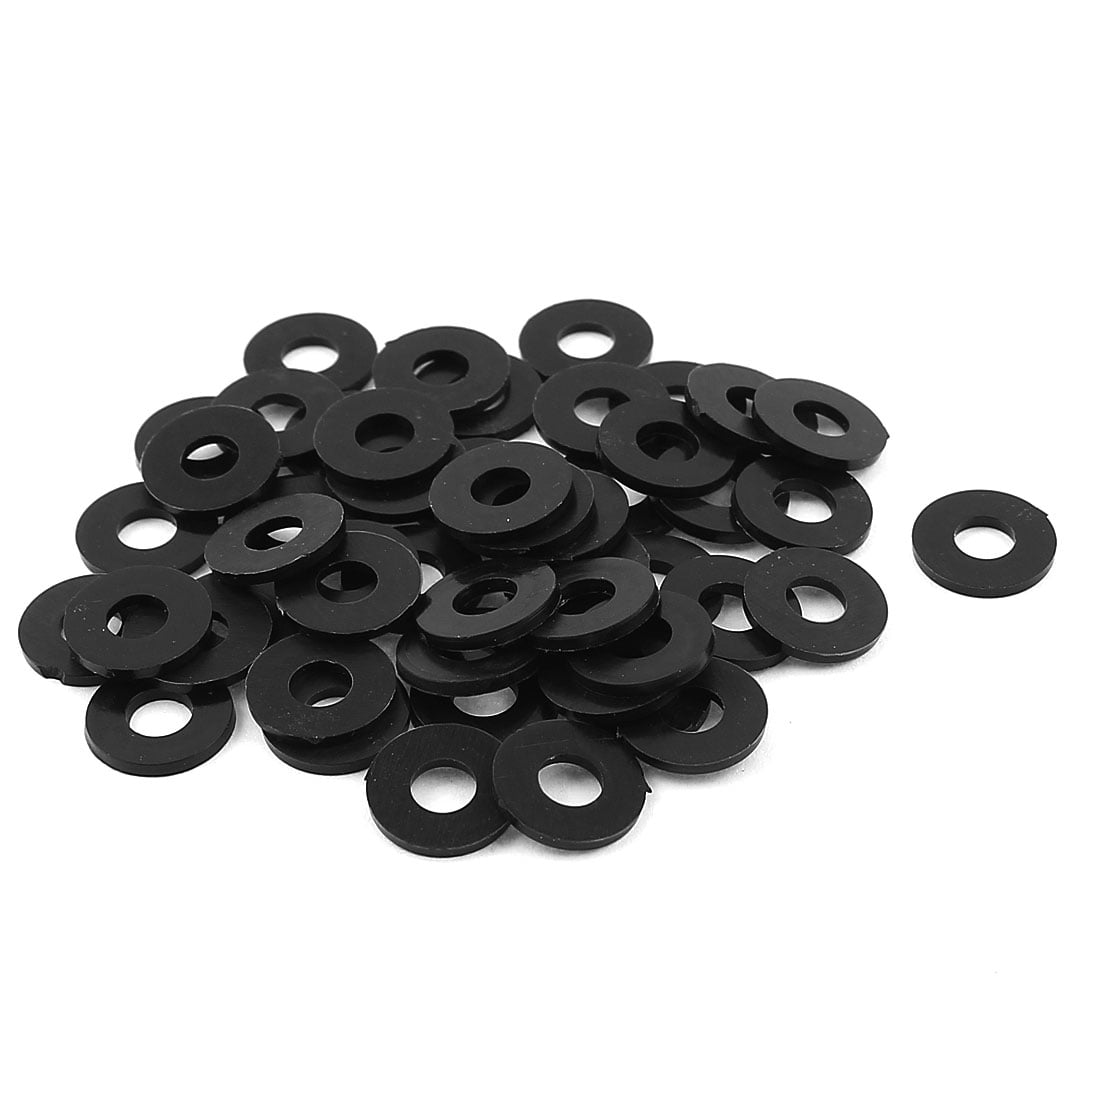 Spacer Washer Nylon Standoff Discounted Packs 